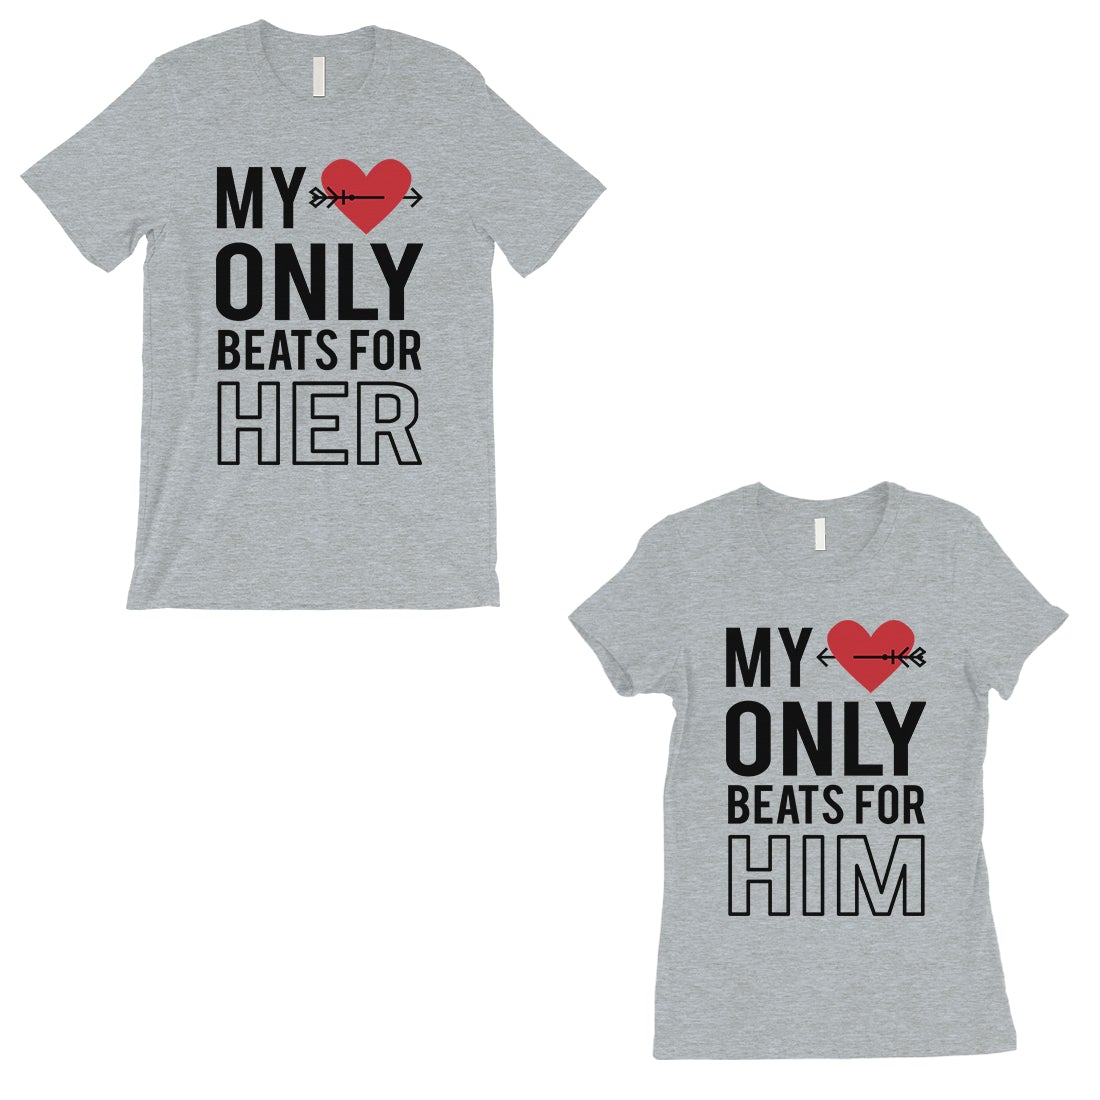 My Heart Beats For Her Him Matching Couple Gift Shirts Grey T-Shirt